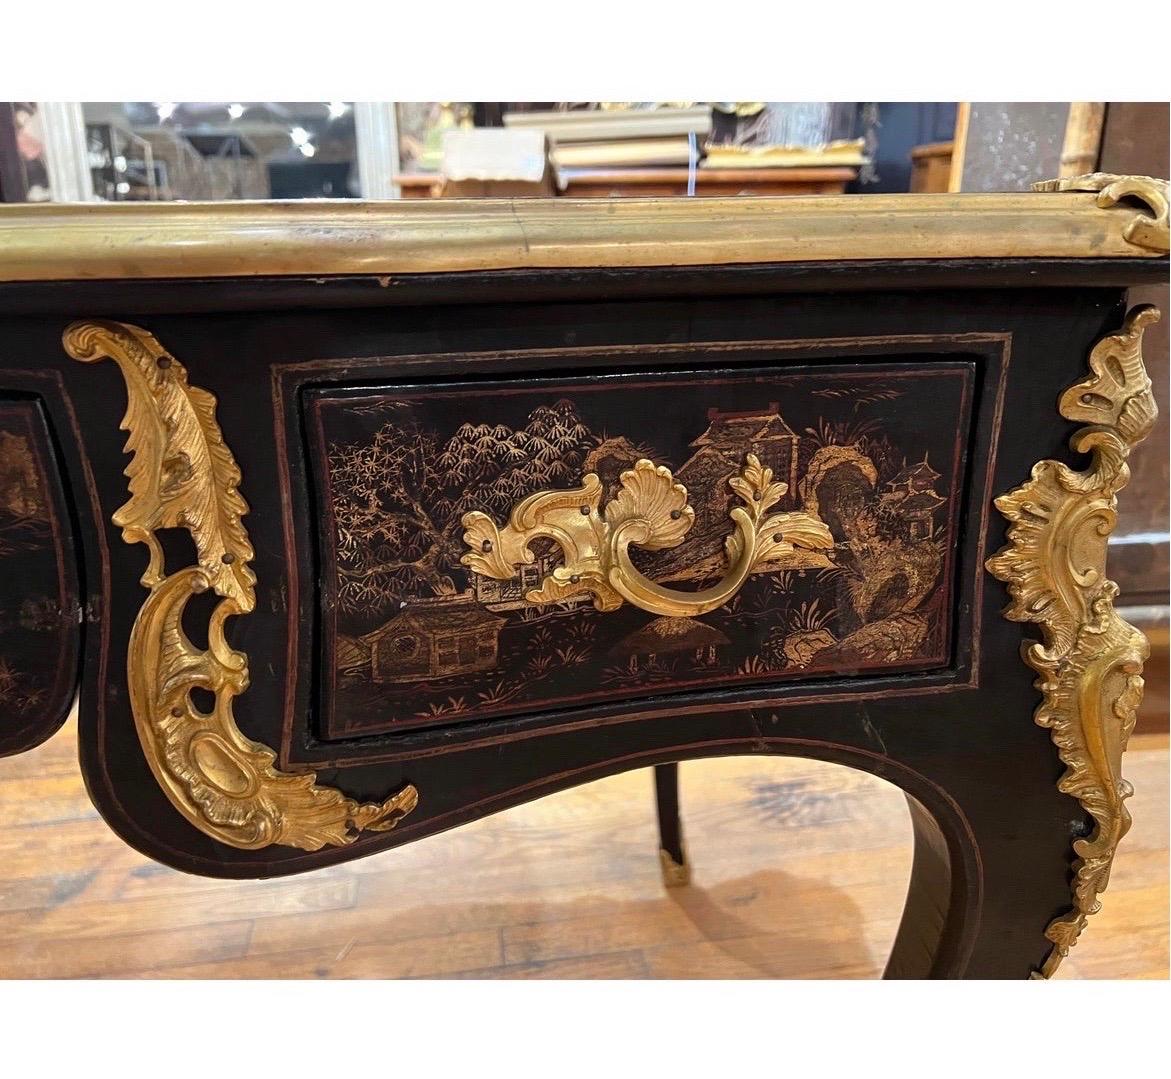 19th Century 19th C French Bronze Ormolu Mounted Black Chinoiserie Decorated Leather Top Desk